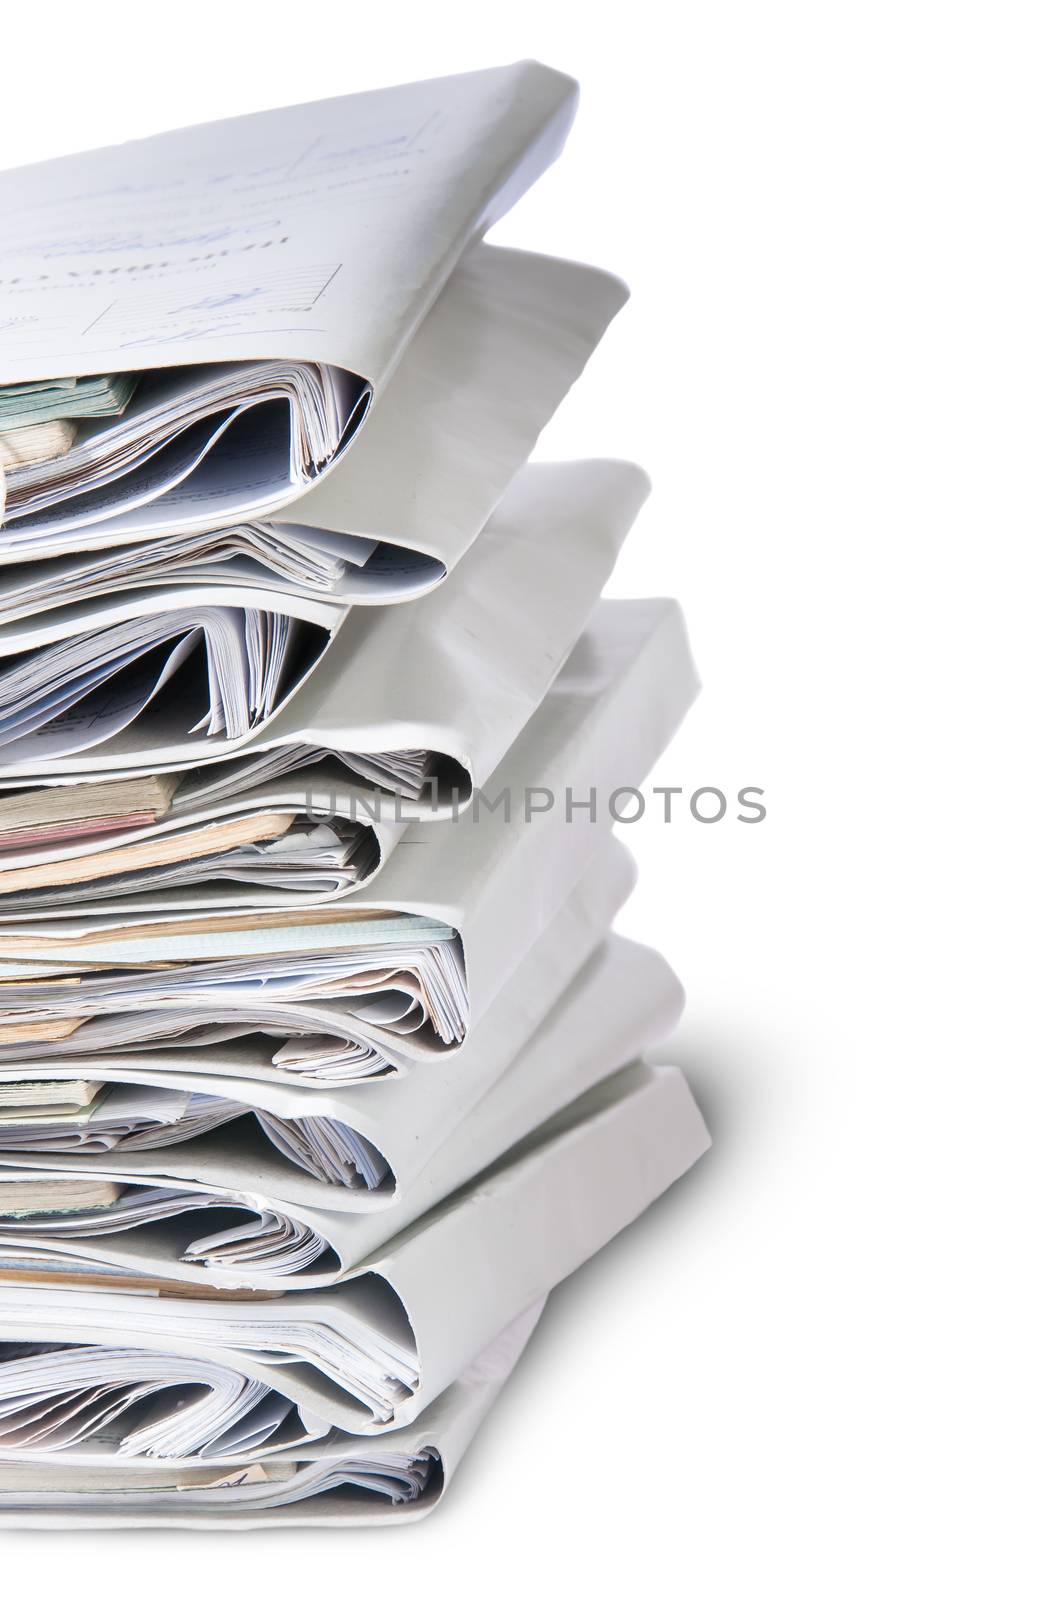 Covers Files Arranged In Chaotic Stack Isolated On White Background